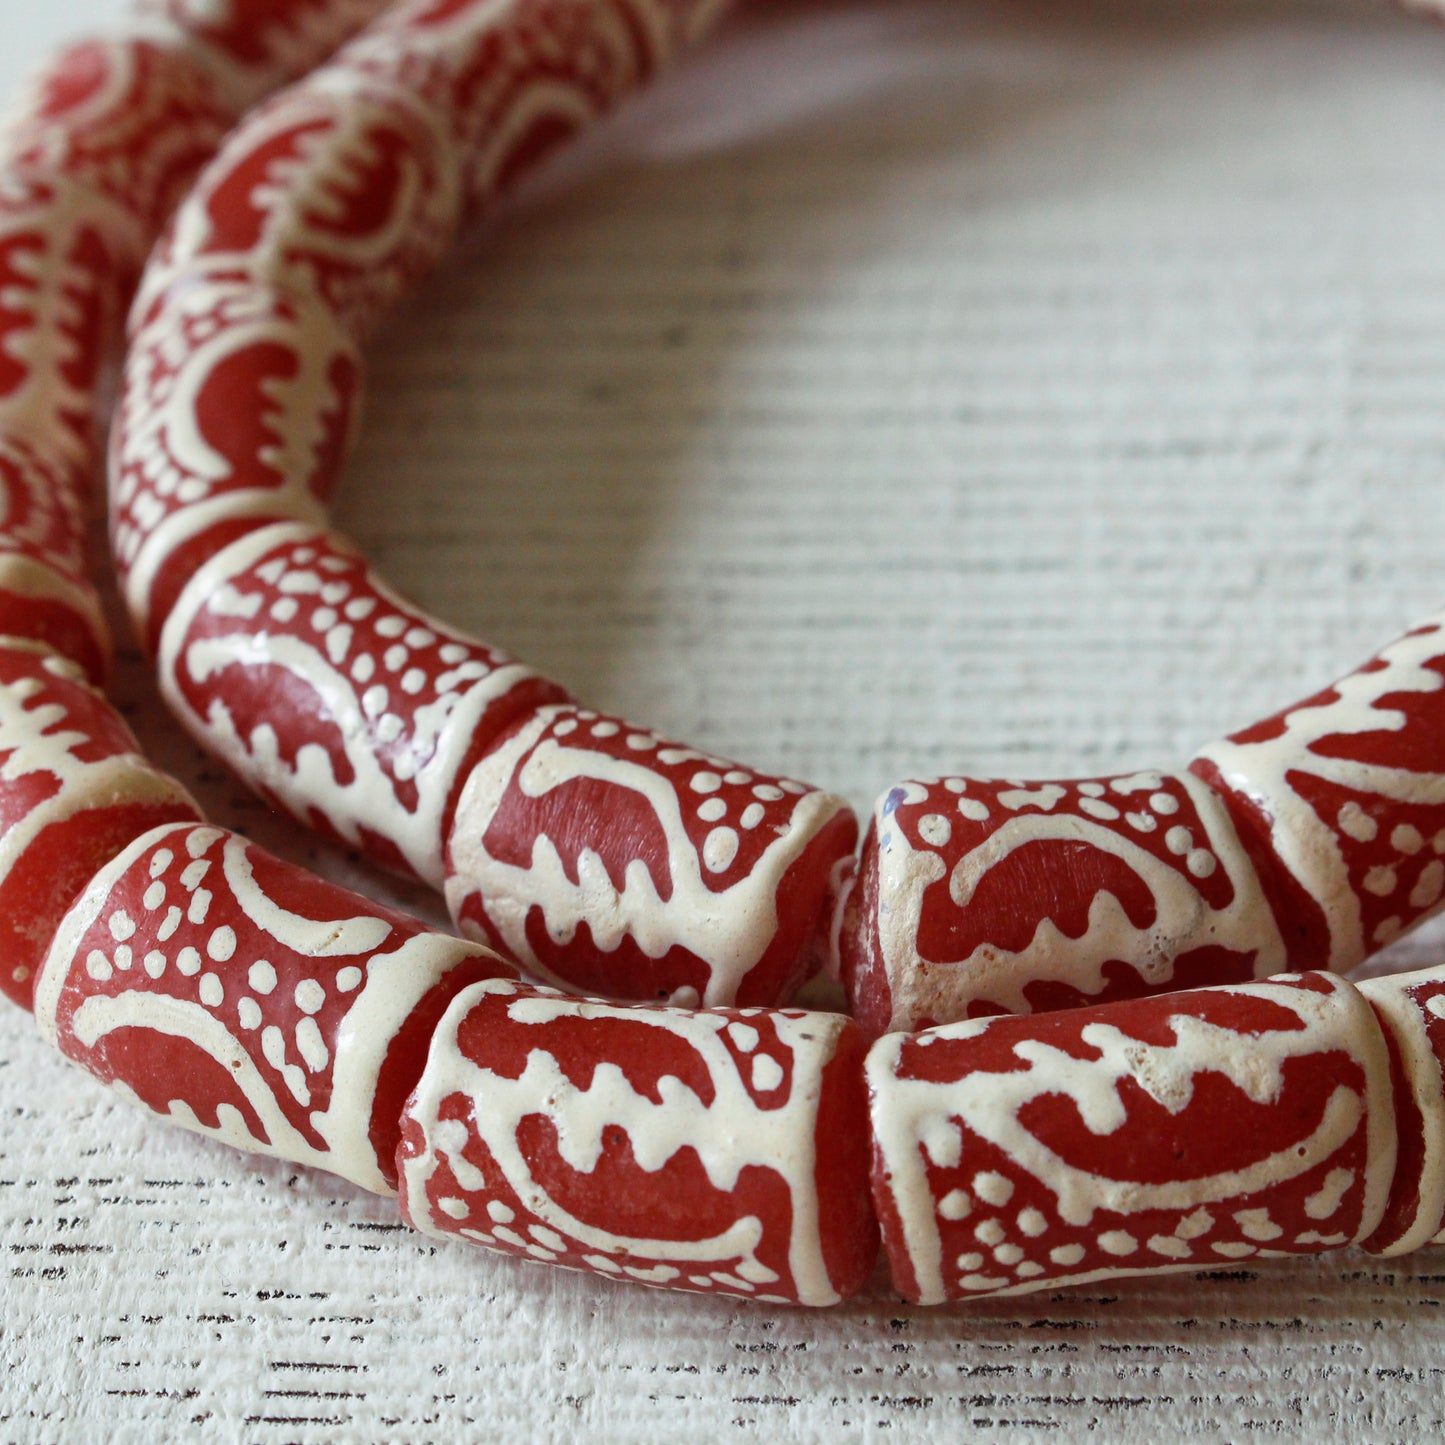 Painted Tube Beads From Ghana Africa - Large Hole - Red - 15 Beads